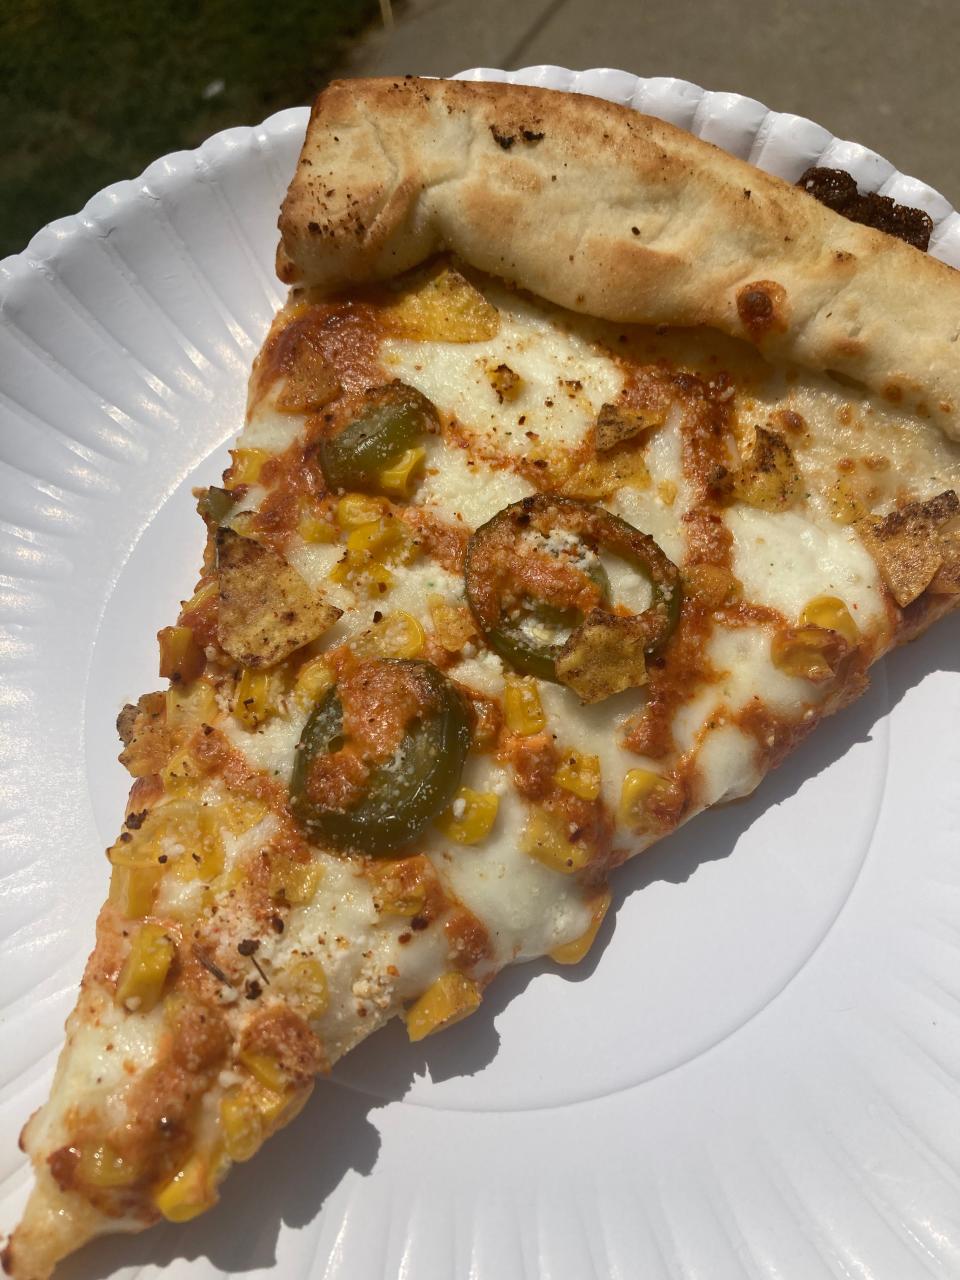 The Elote Street Corn Pizza, which we rated five stars, packed flavor and heat on a perfectly crispy crust.